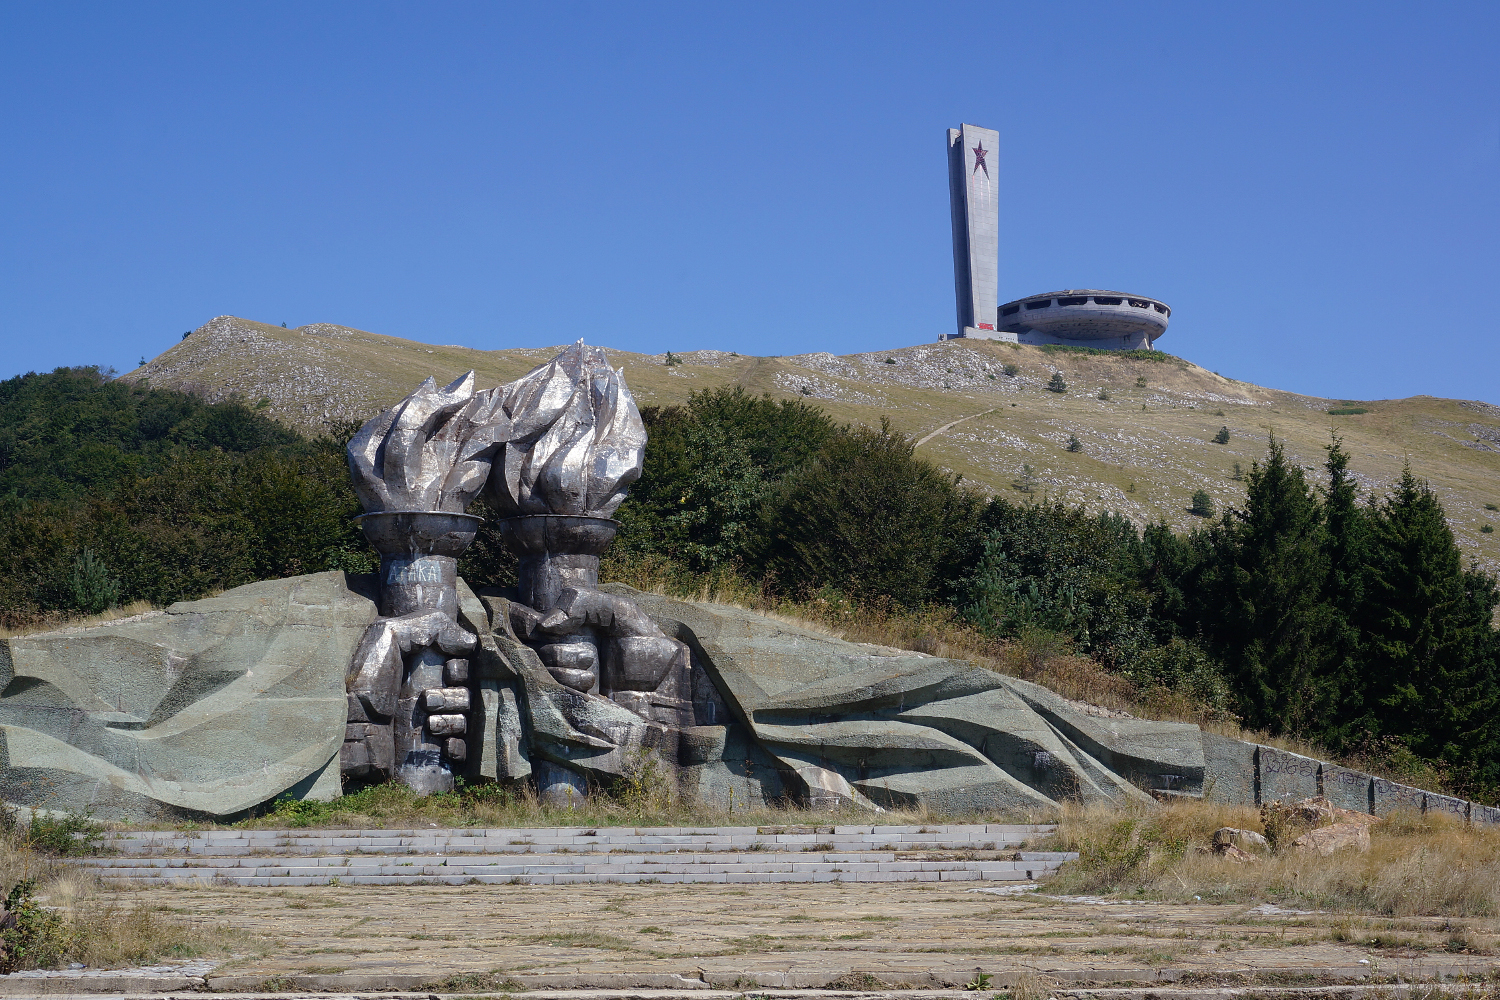 Bulgaria's abandoned Buzludzha monument was built as a socialist assembly hall © Anita Isalska / Lonely Planet